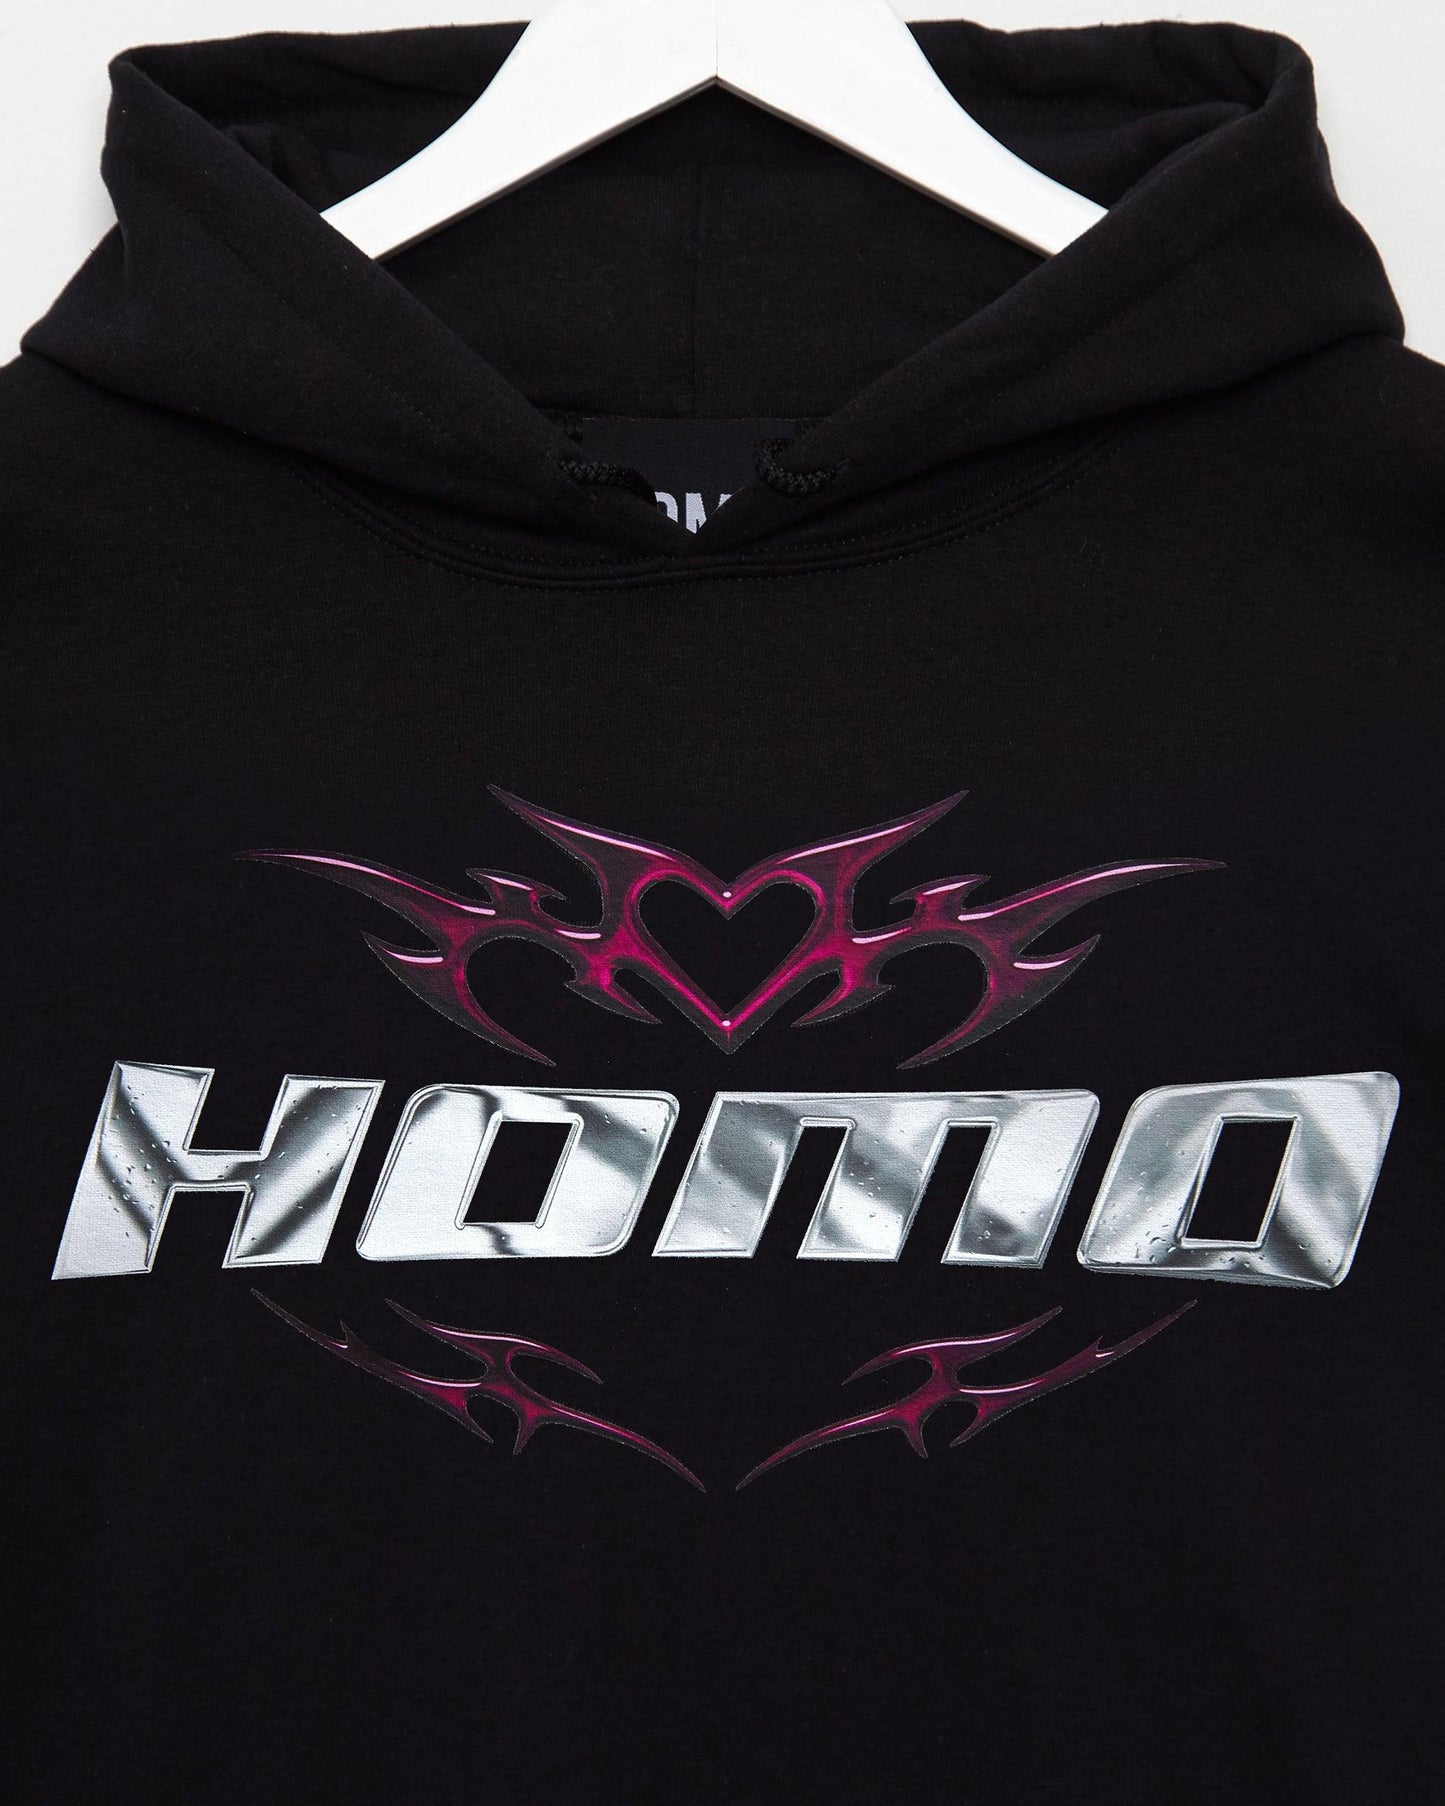 Chrome Y2K: HOMO, silver and pink on black - pullover hoodie.